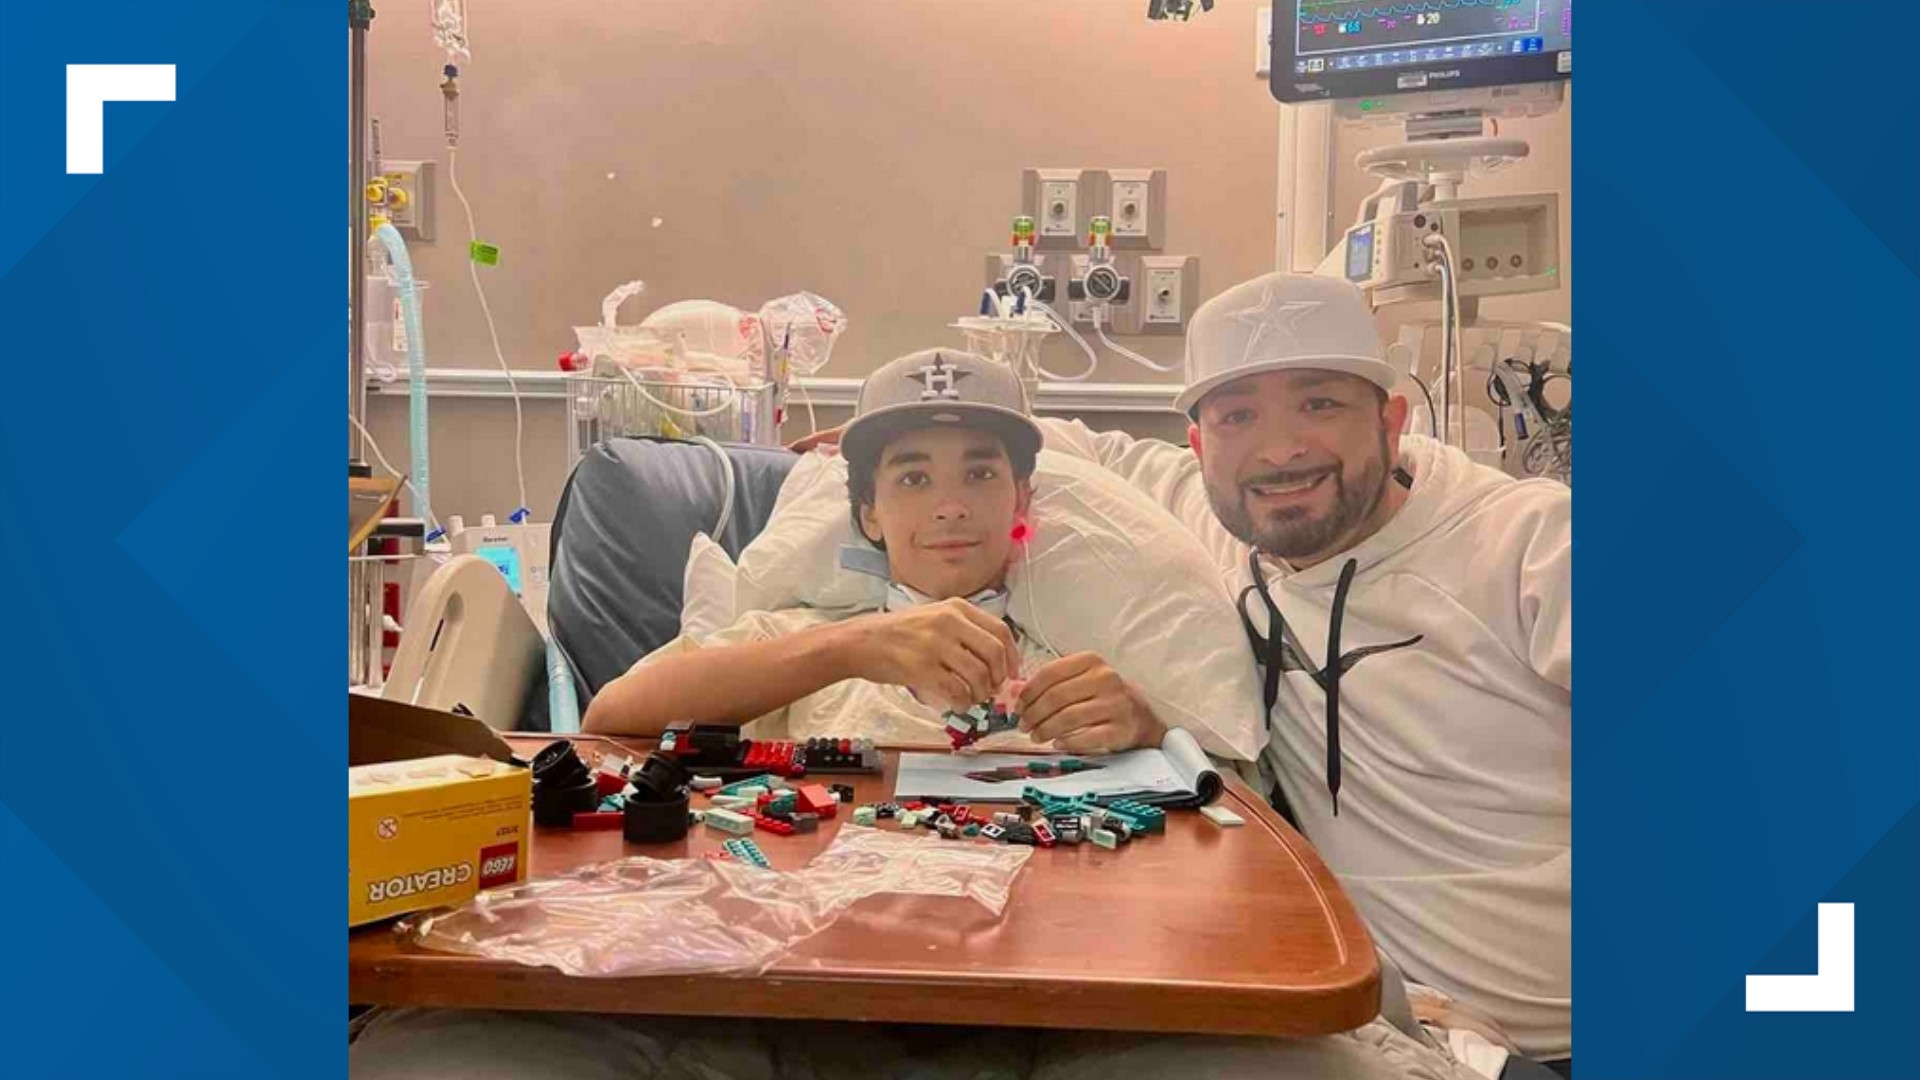 Erik Cantu has been in the hospital for over a month.